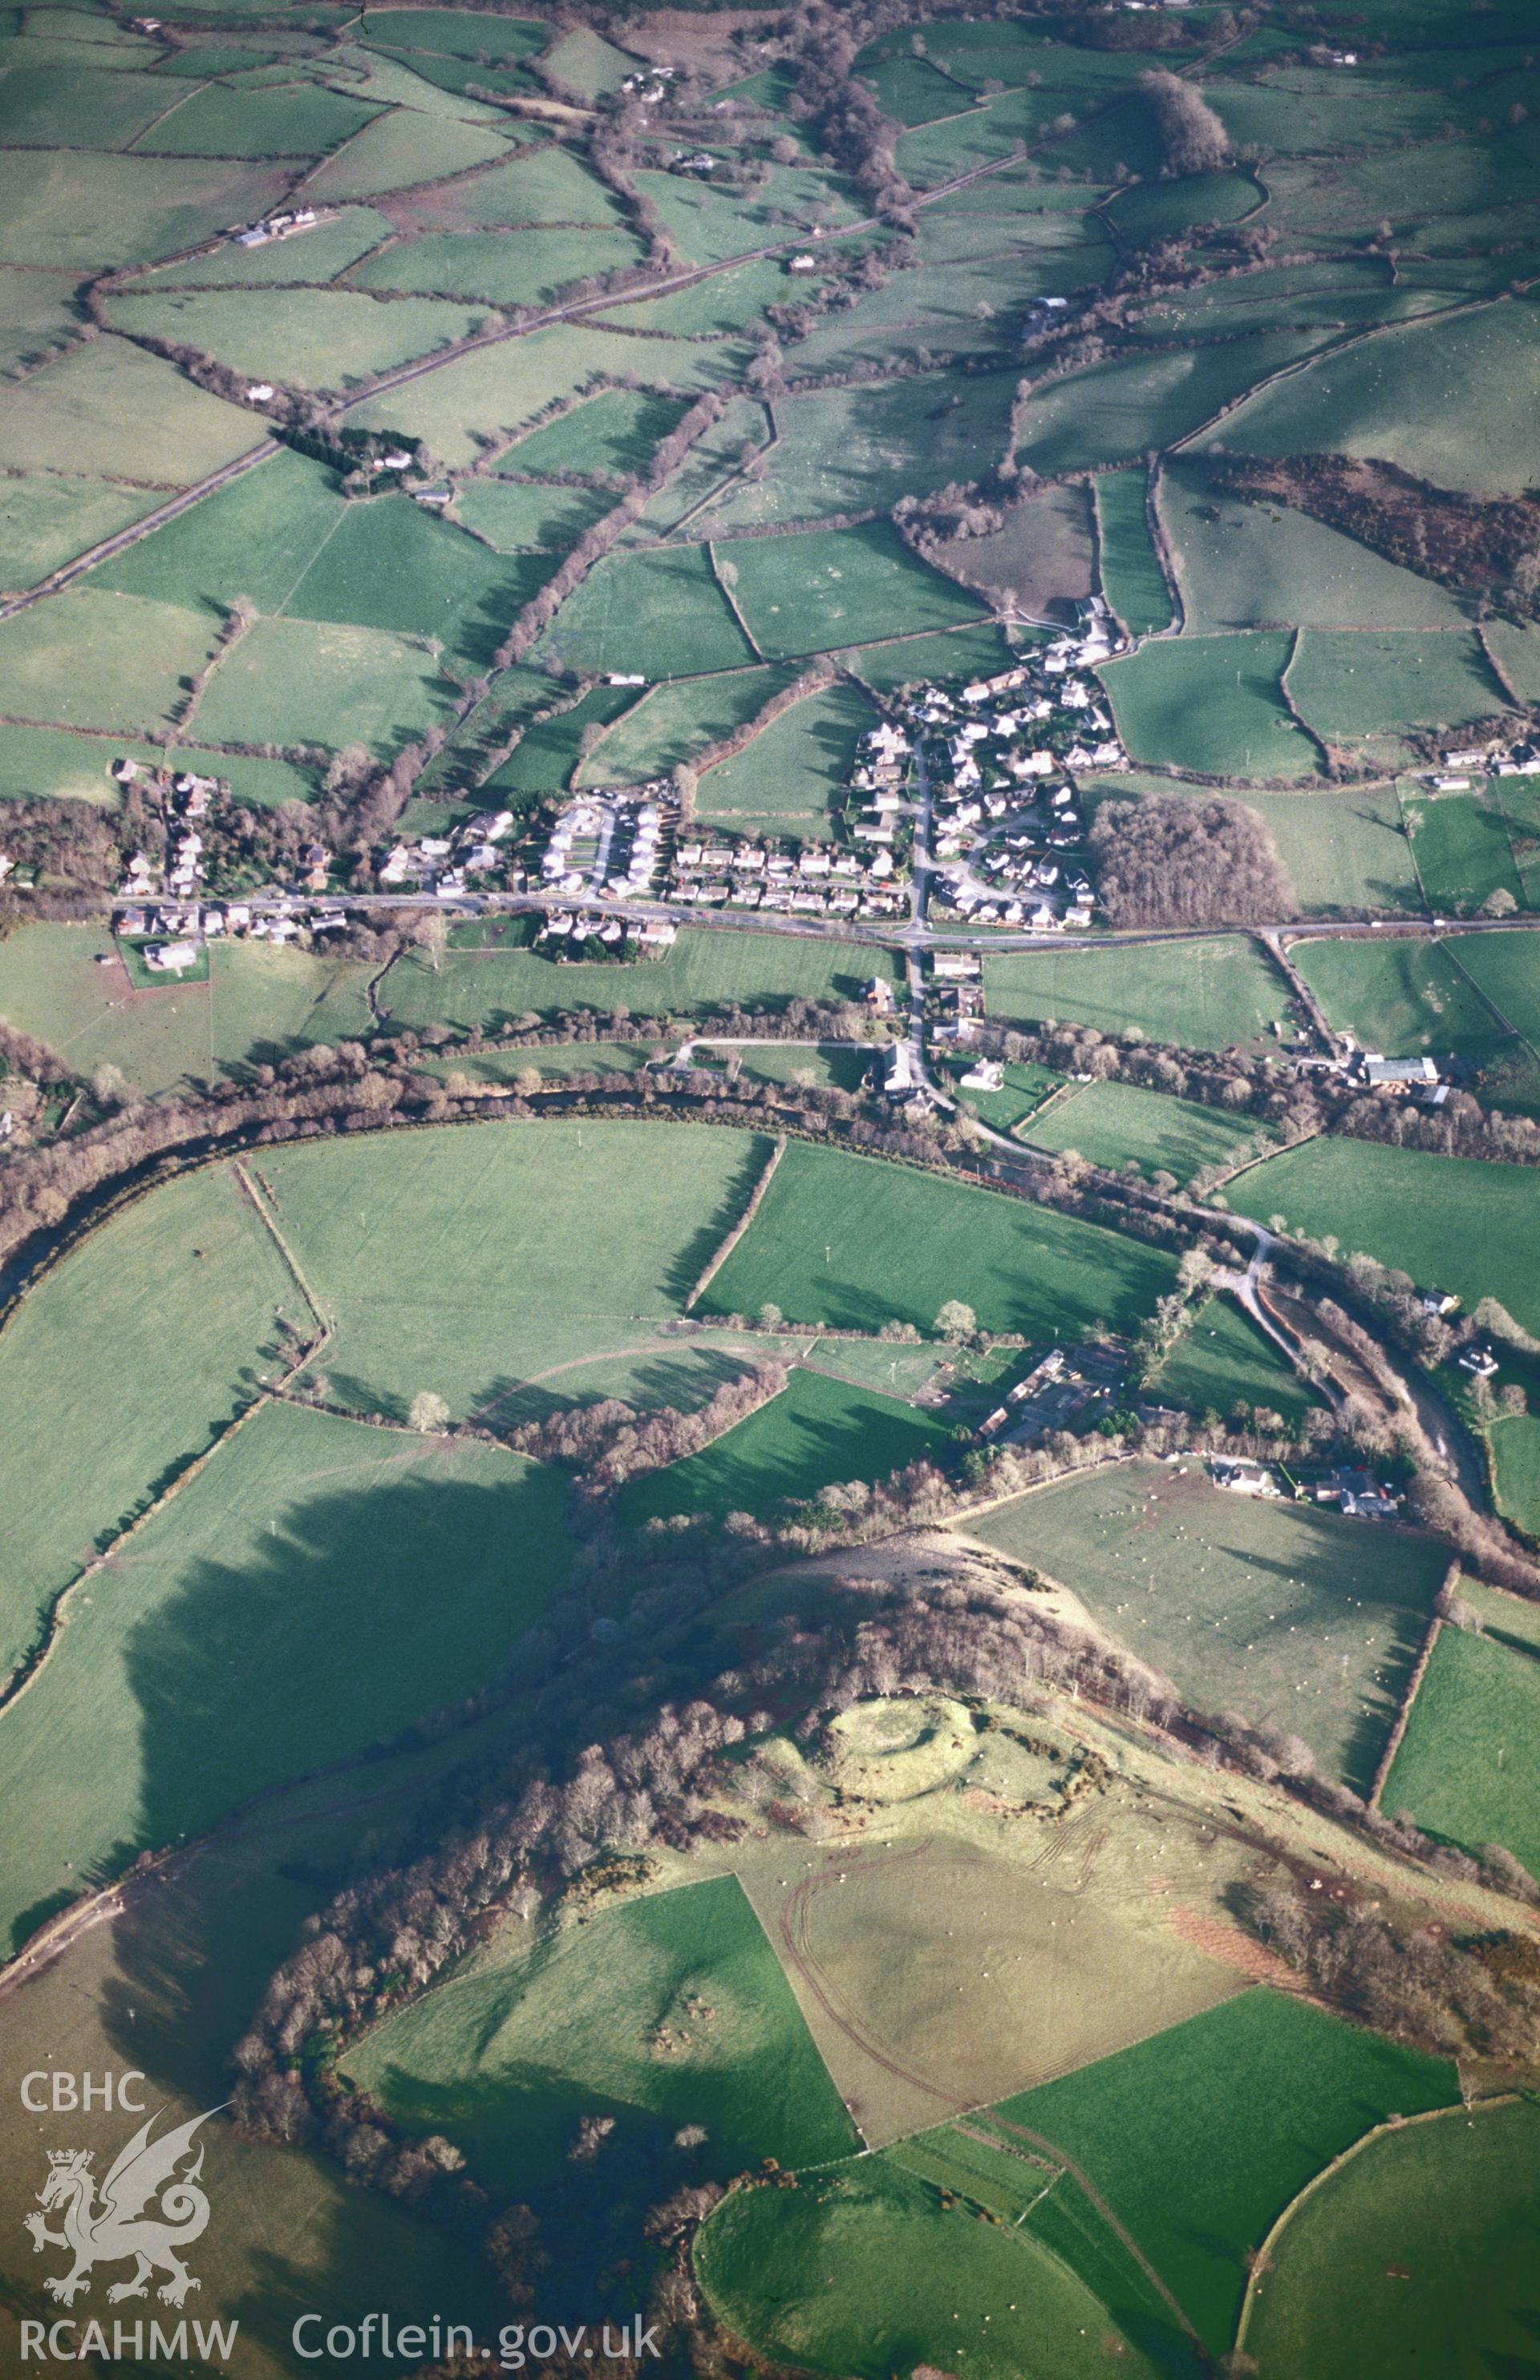 RCAHMW colour oblique aerial photograph of Castell Tan y Bwlch, Aberystwyth, taken by Toby Driver 2002